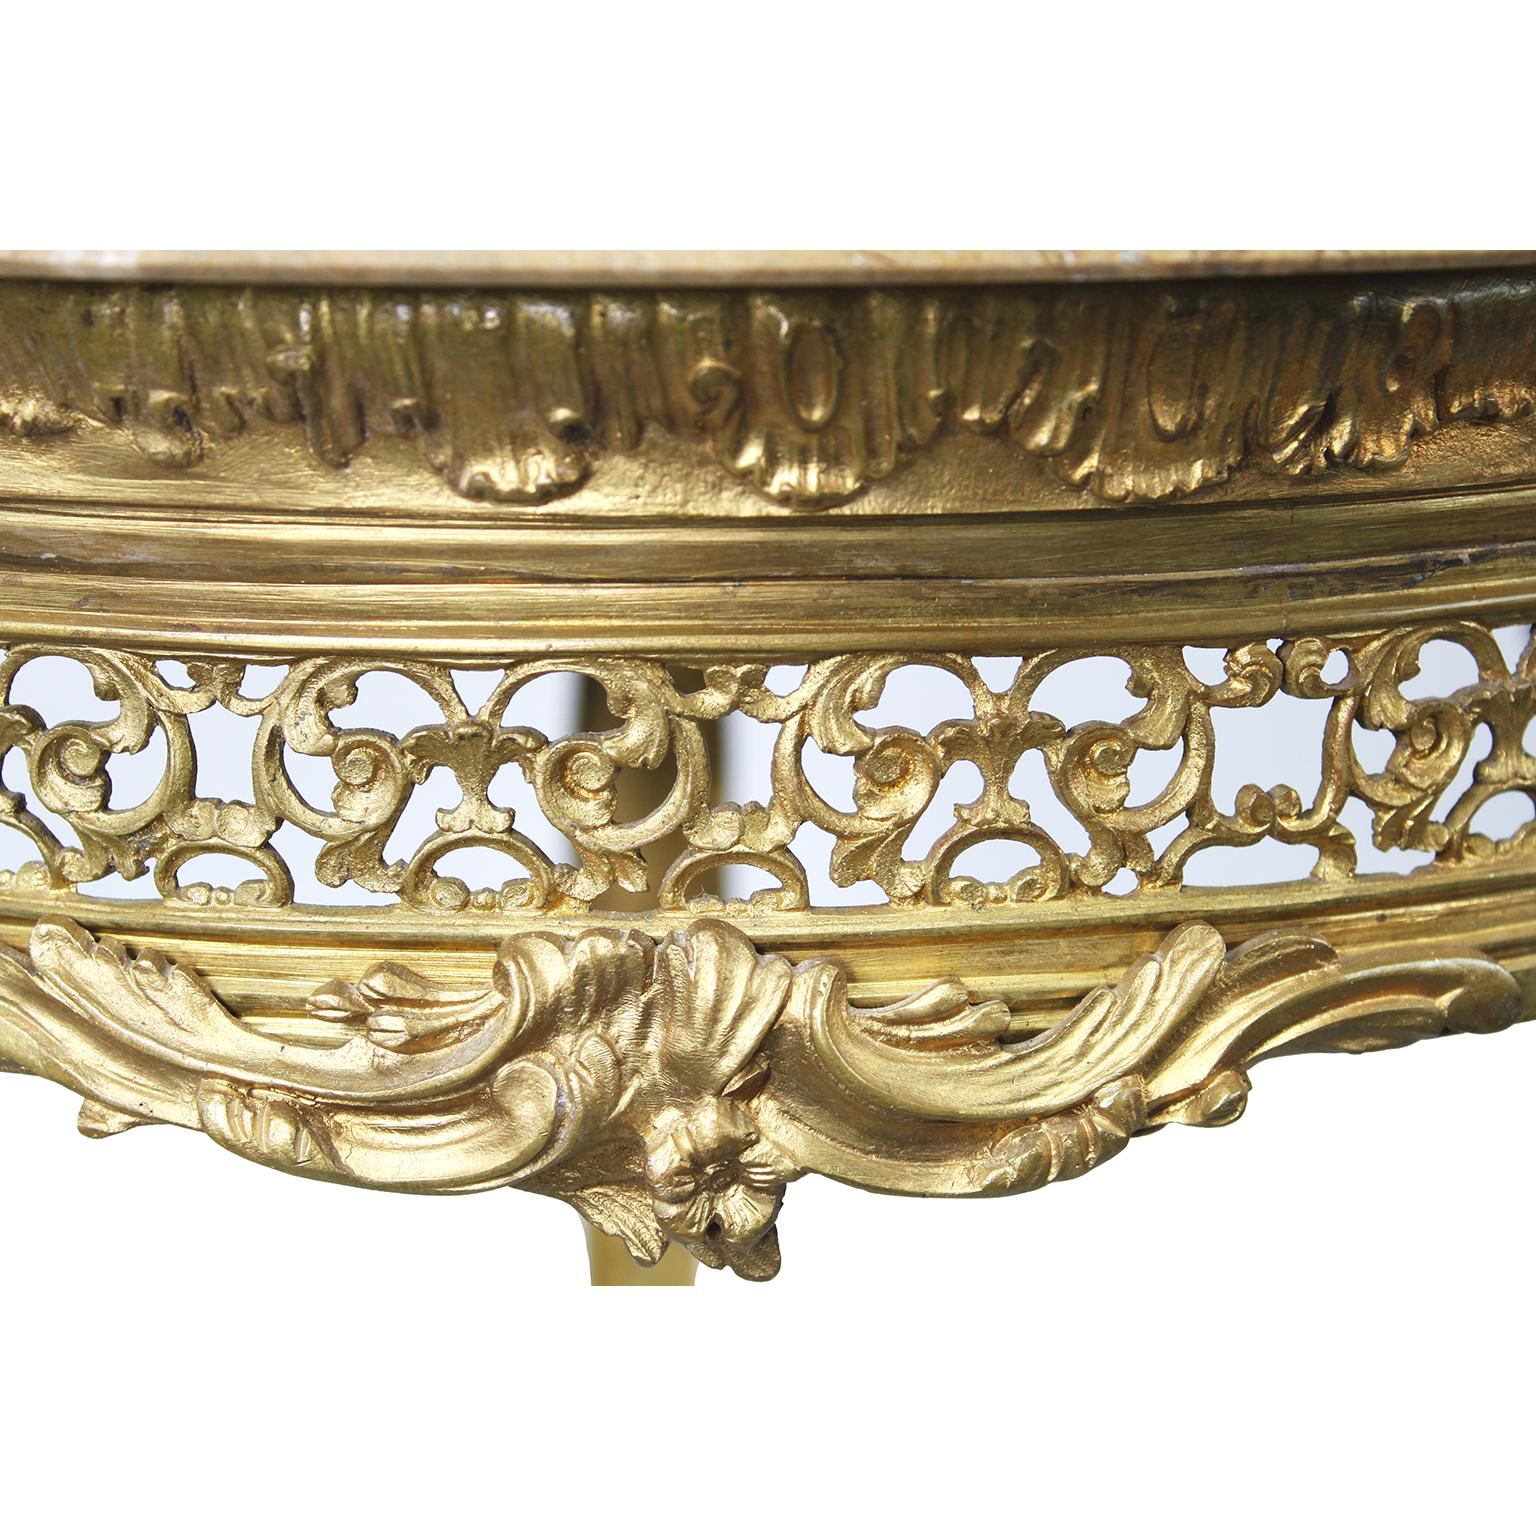 A French Belle Époque Louis XV Style Gilt-Bronze Gueridon Table with Marble Top For Sale 1